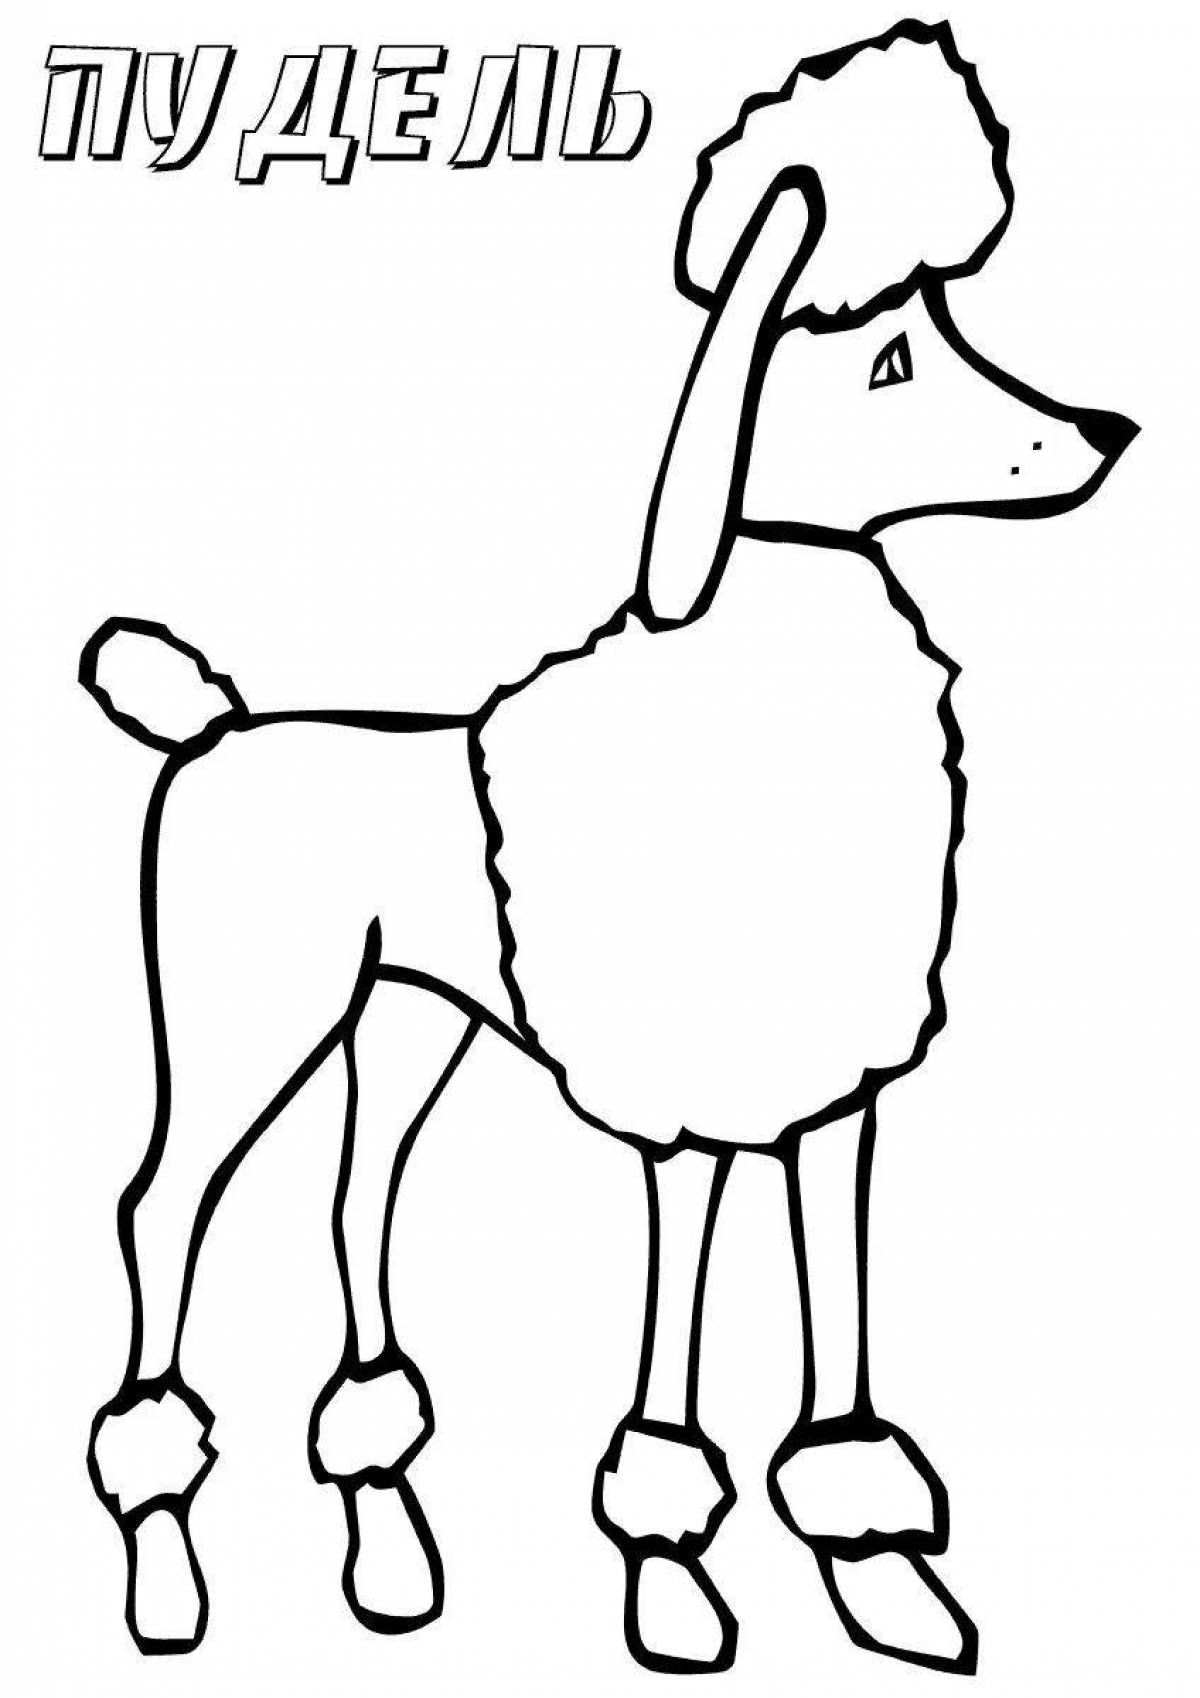 Sparkling poodle coloring page for kids